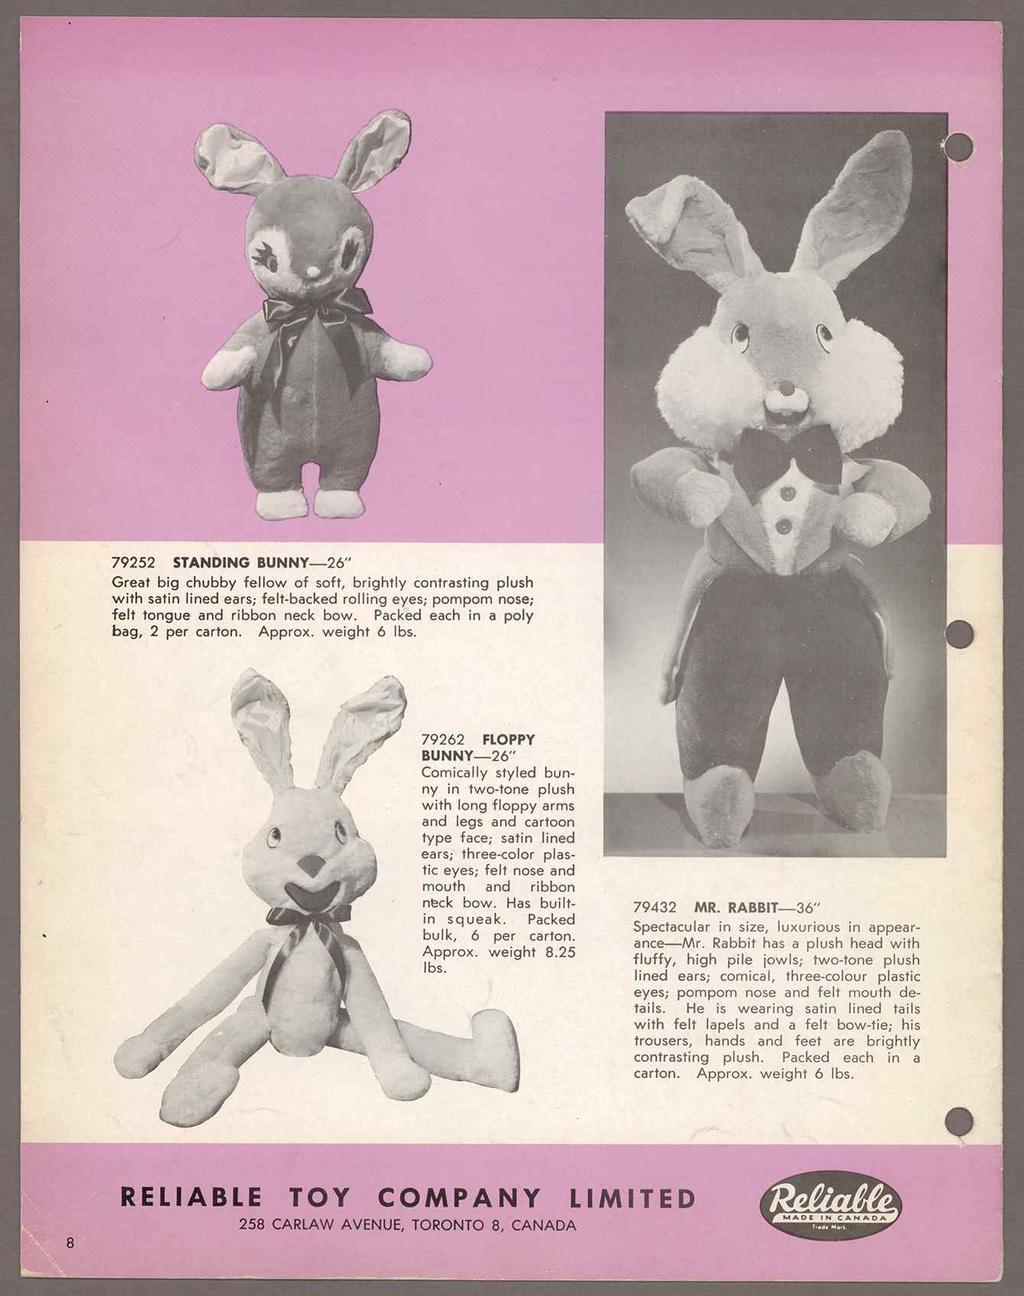 79252 STANDING BUNNY-26" Great big chubby fellow of soft, brightly contrasting plush with satin lined ears; felt-backed rolling eyes; pompom nose; felt tongue and ribbon neck bow.